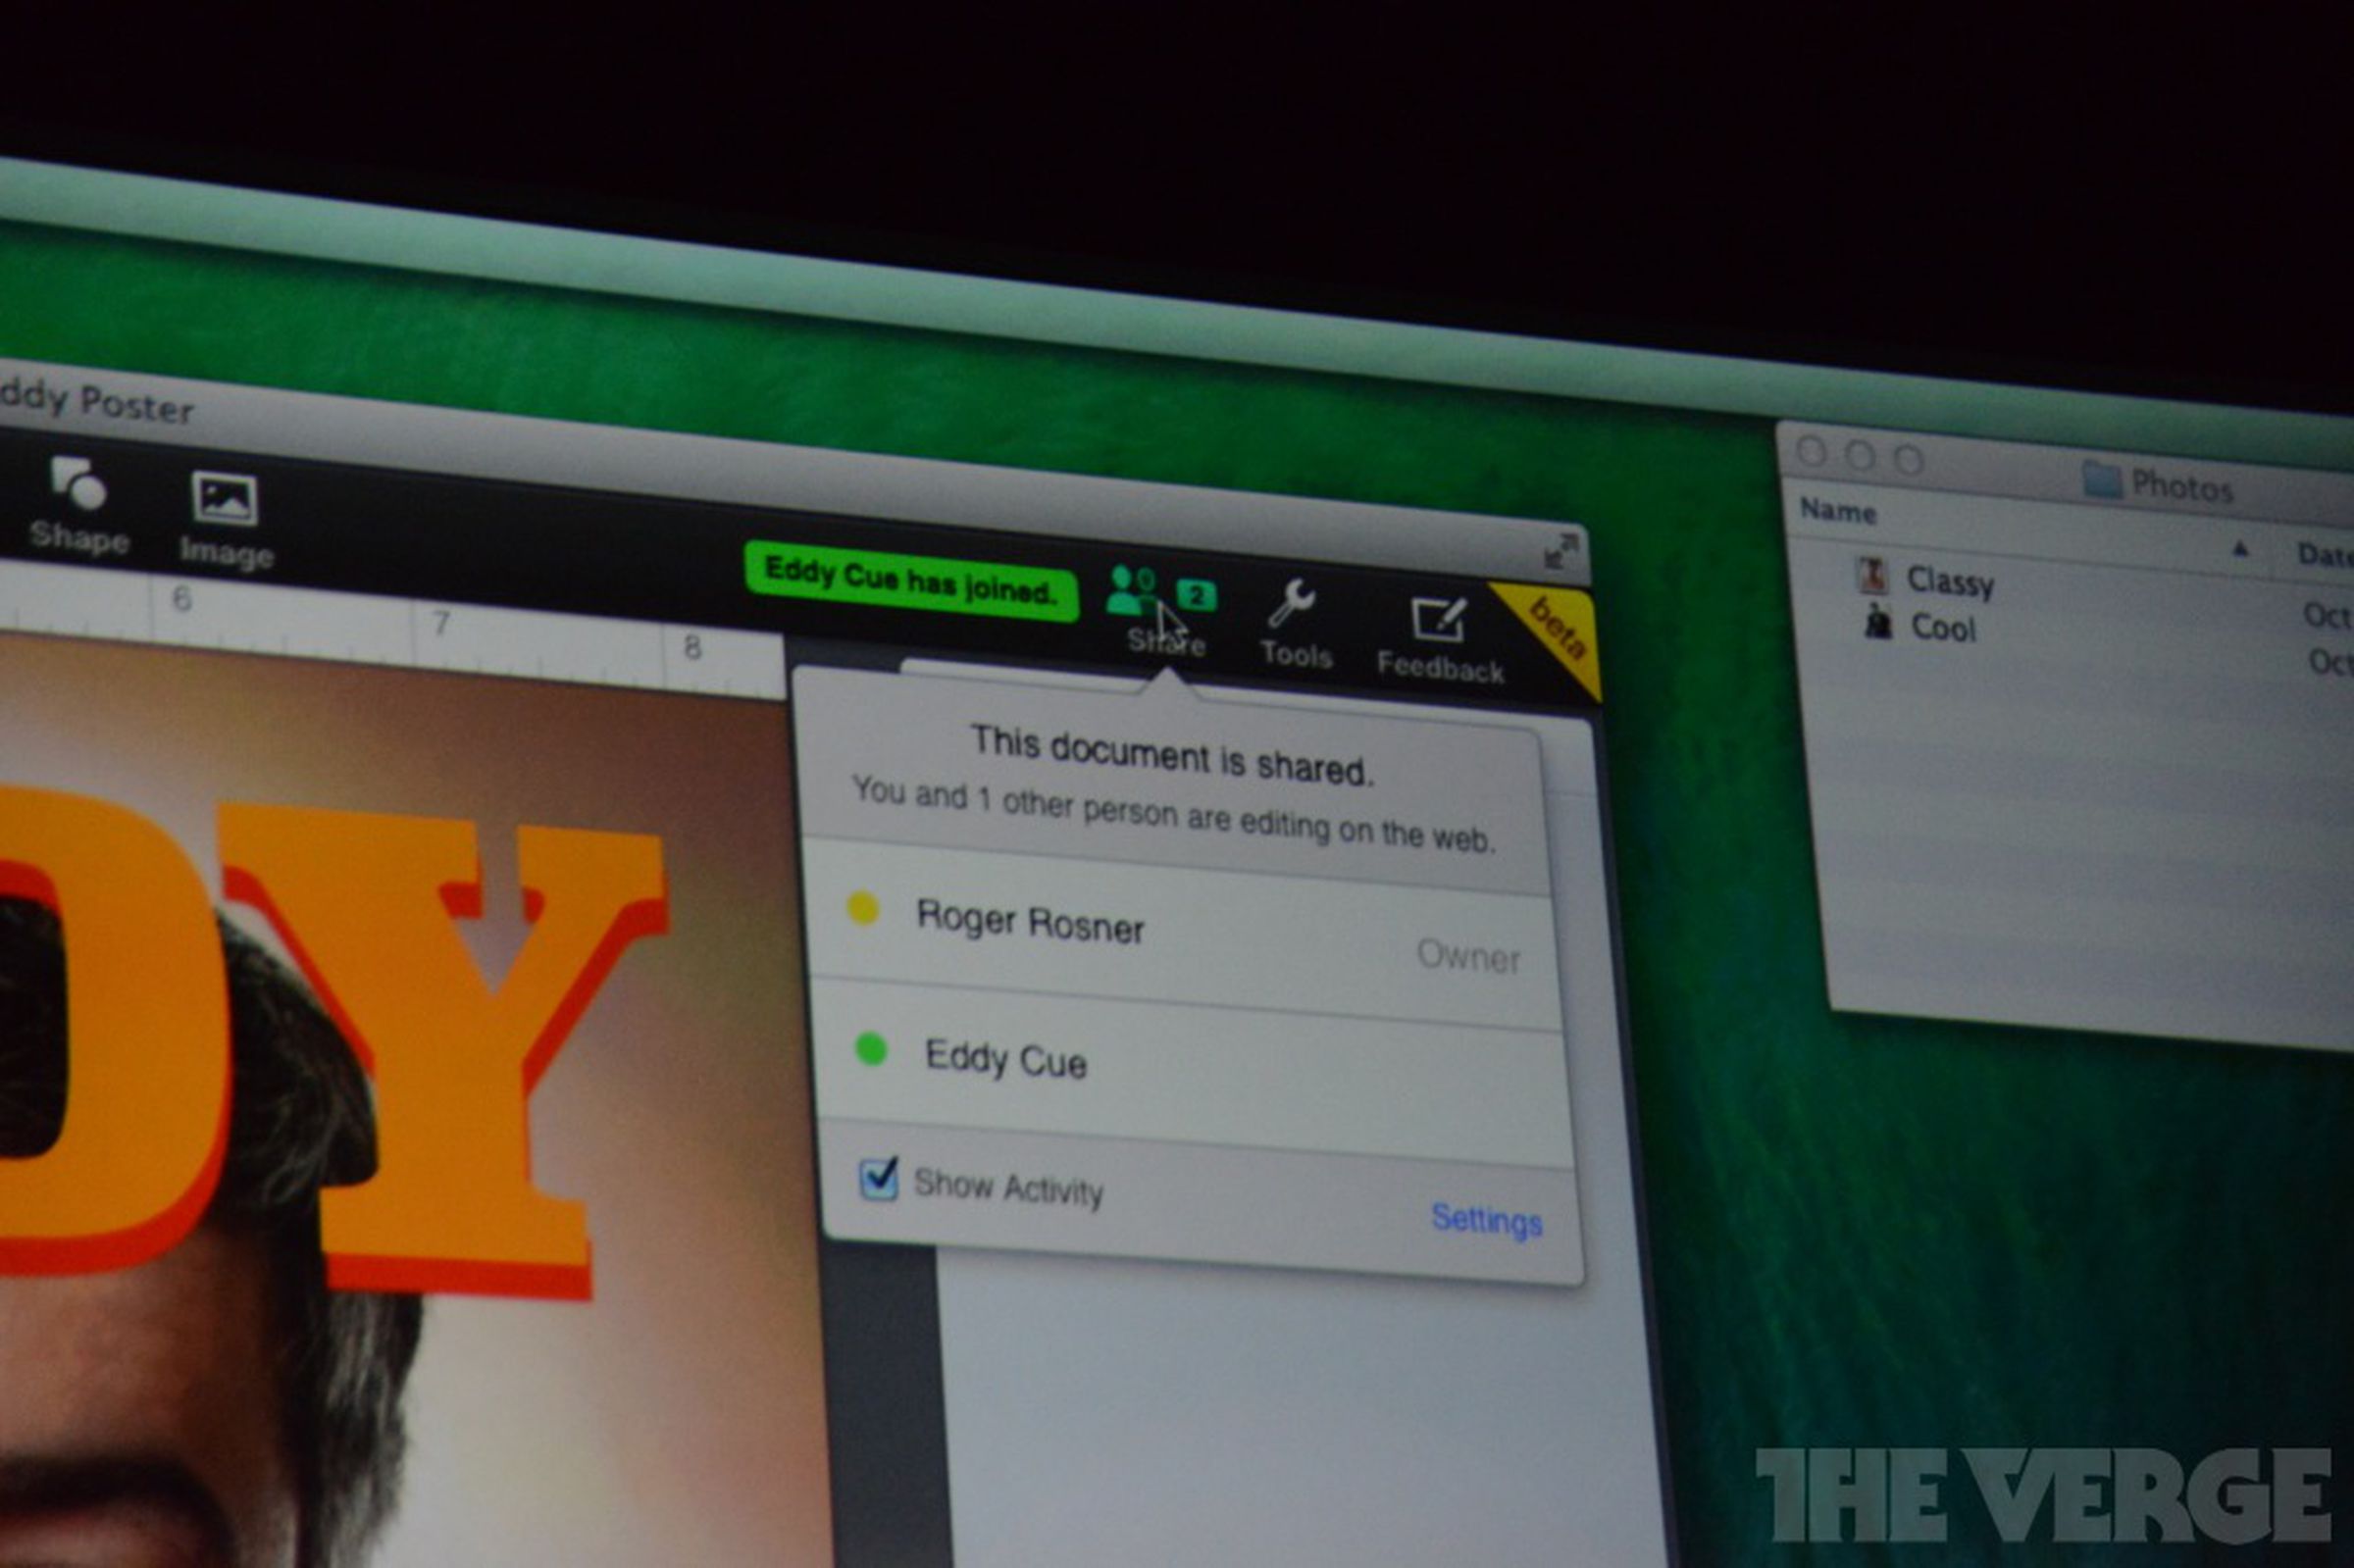 Photos of the new iWork update from Apple's fall 2013 event